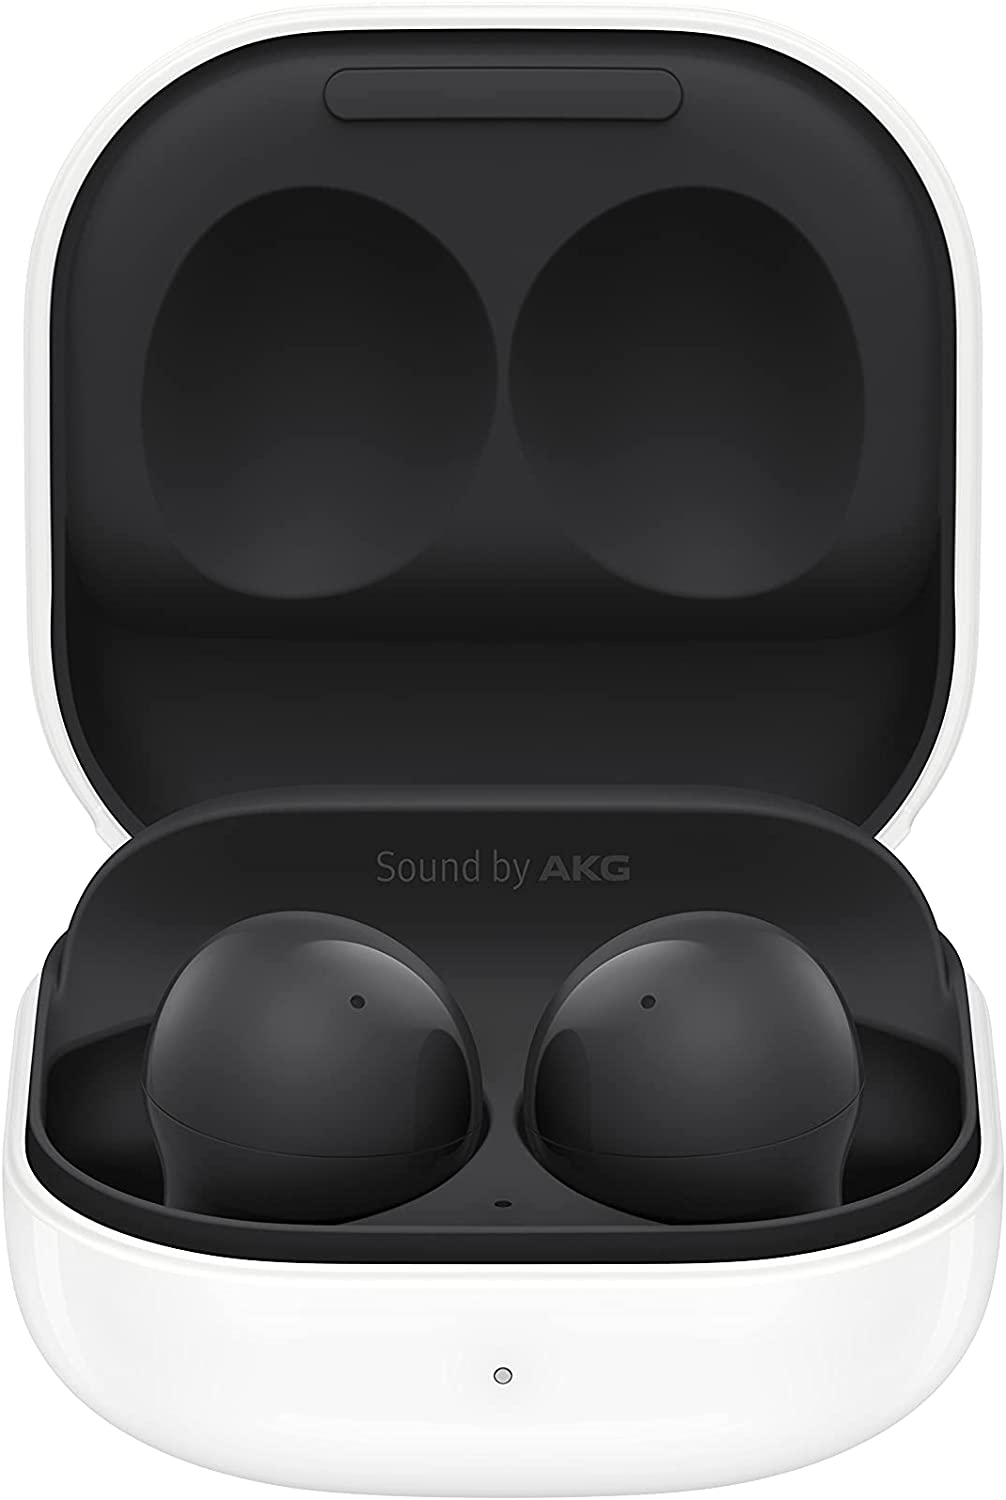 Samsung Galaxy Buds 2 True Wireless Noise Cancelling Bluetooth Earbuds -Graphite (Certified Refurbished)